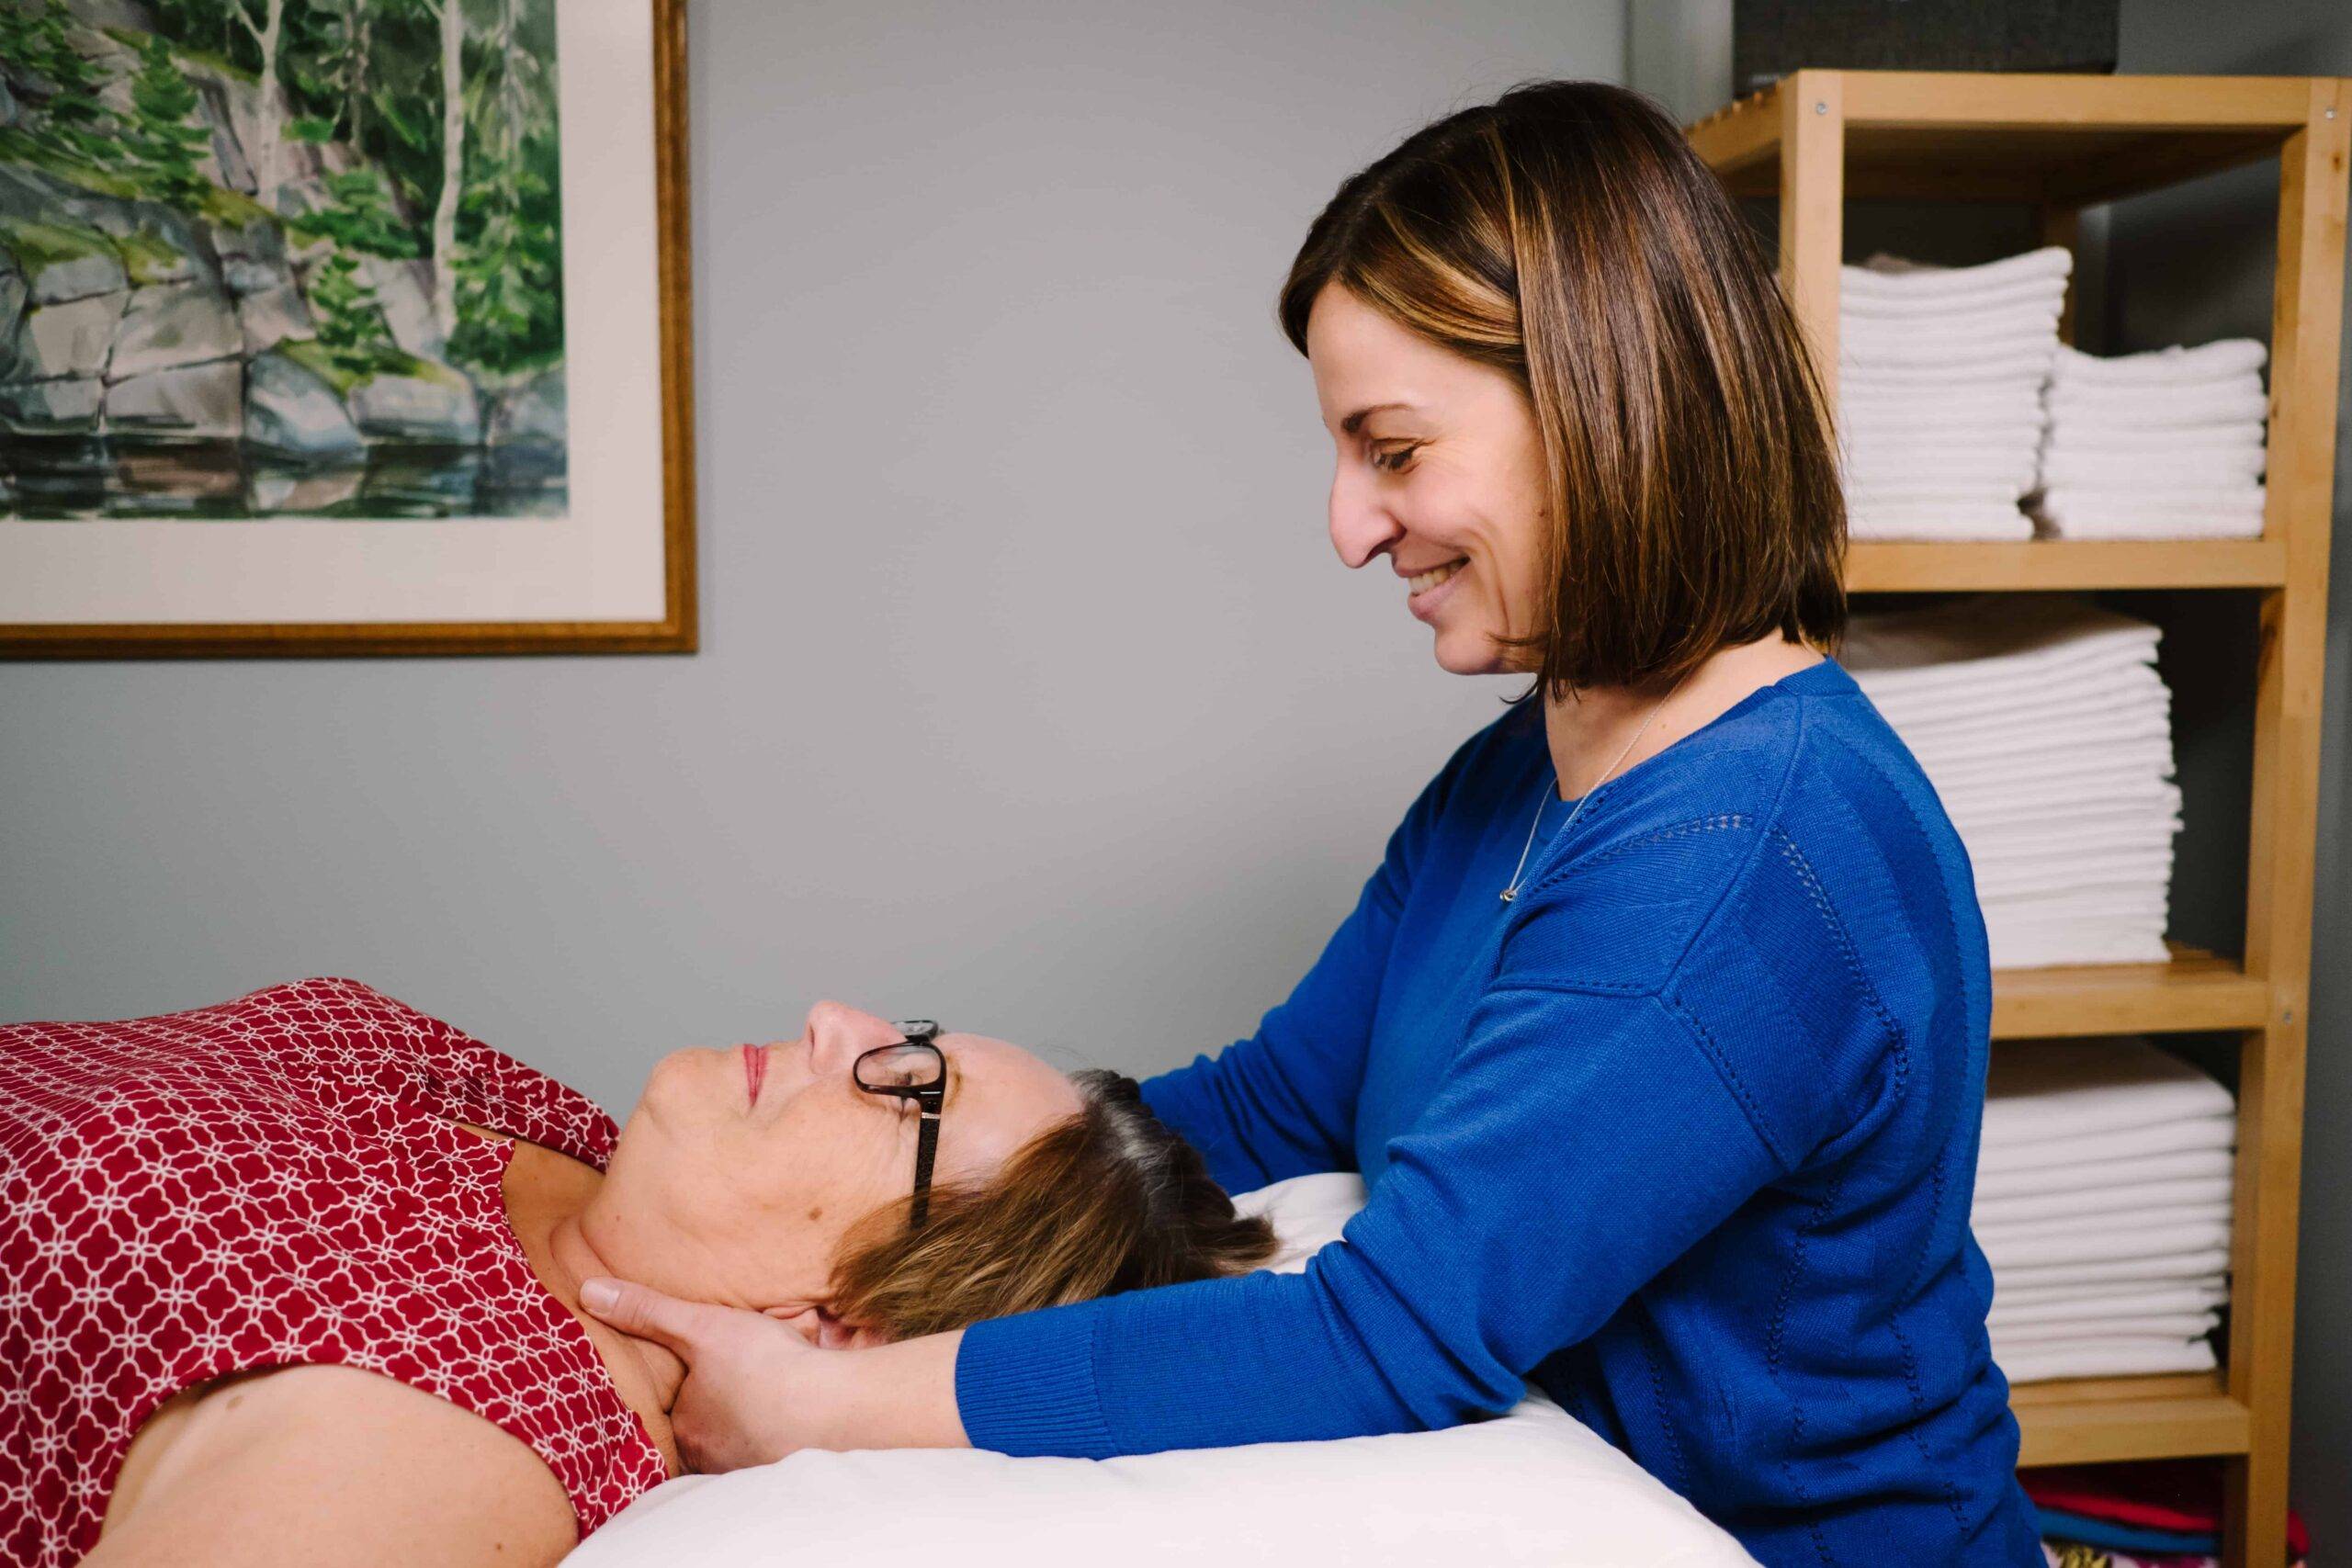 Physiotherapist Beth Hoag applies manual therapy to a patient to help alleviate the side-effects of cancer treatment.